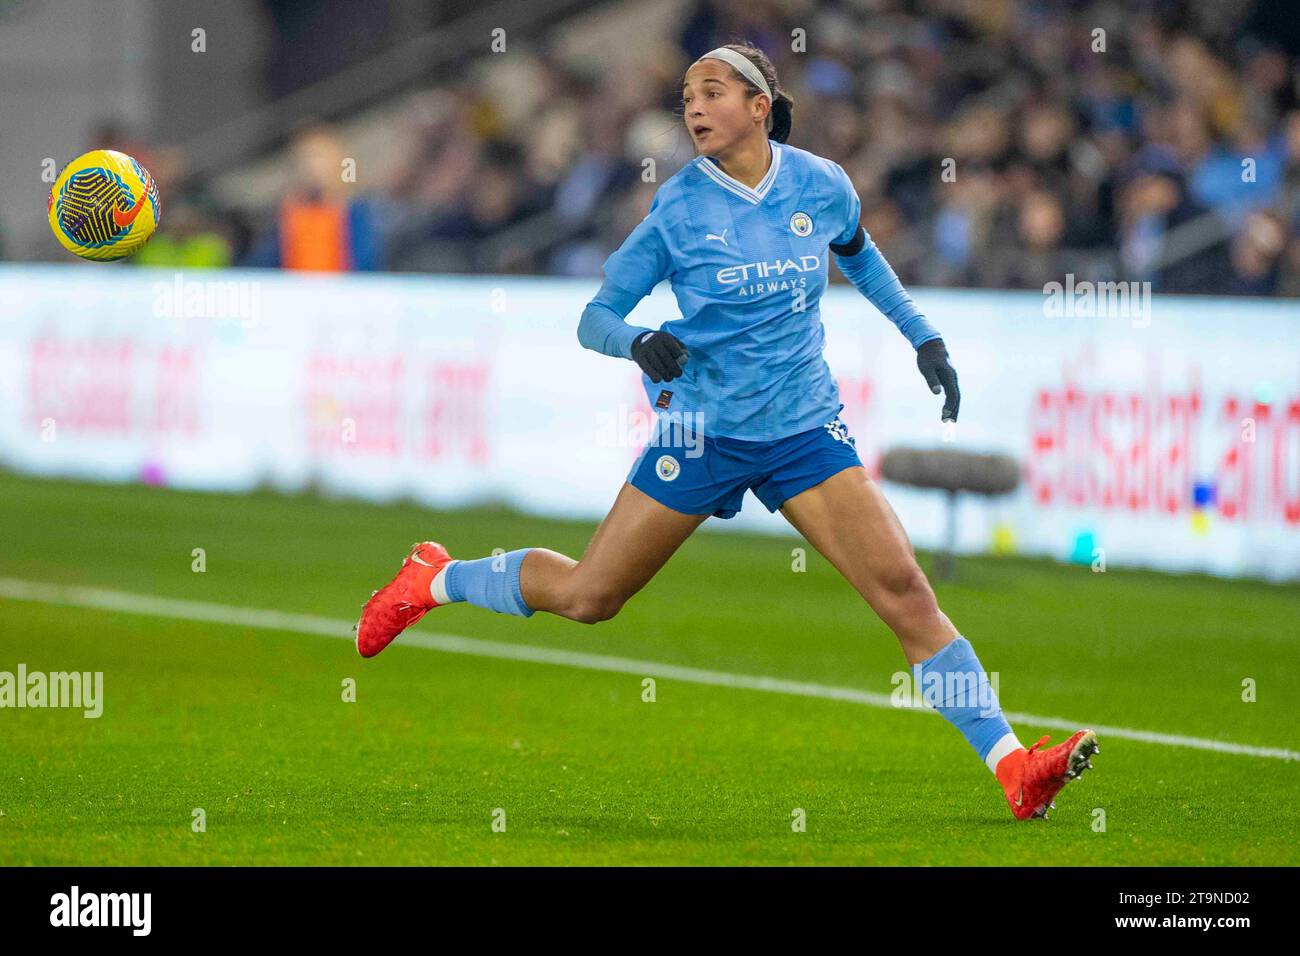 Manchester on Saturday 25th November 2023.Deyna Castellanos #10 of Manchester City in action during the Barclays FA Women's Super League match between Manchester City and Tottenham Hotspur at the Joie Stadium, Manchester on Saturday 25th November 2023. (Photo: Mike Morese | MI News) Credit: MI News & Sport /Alamy Live News Stock Photo